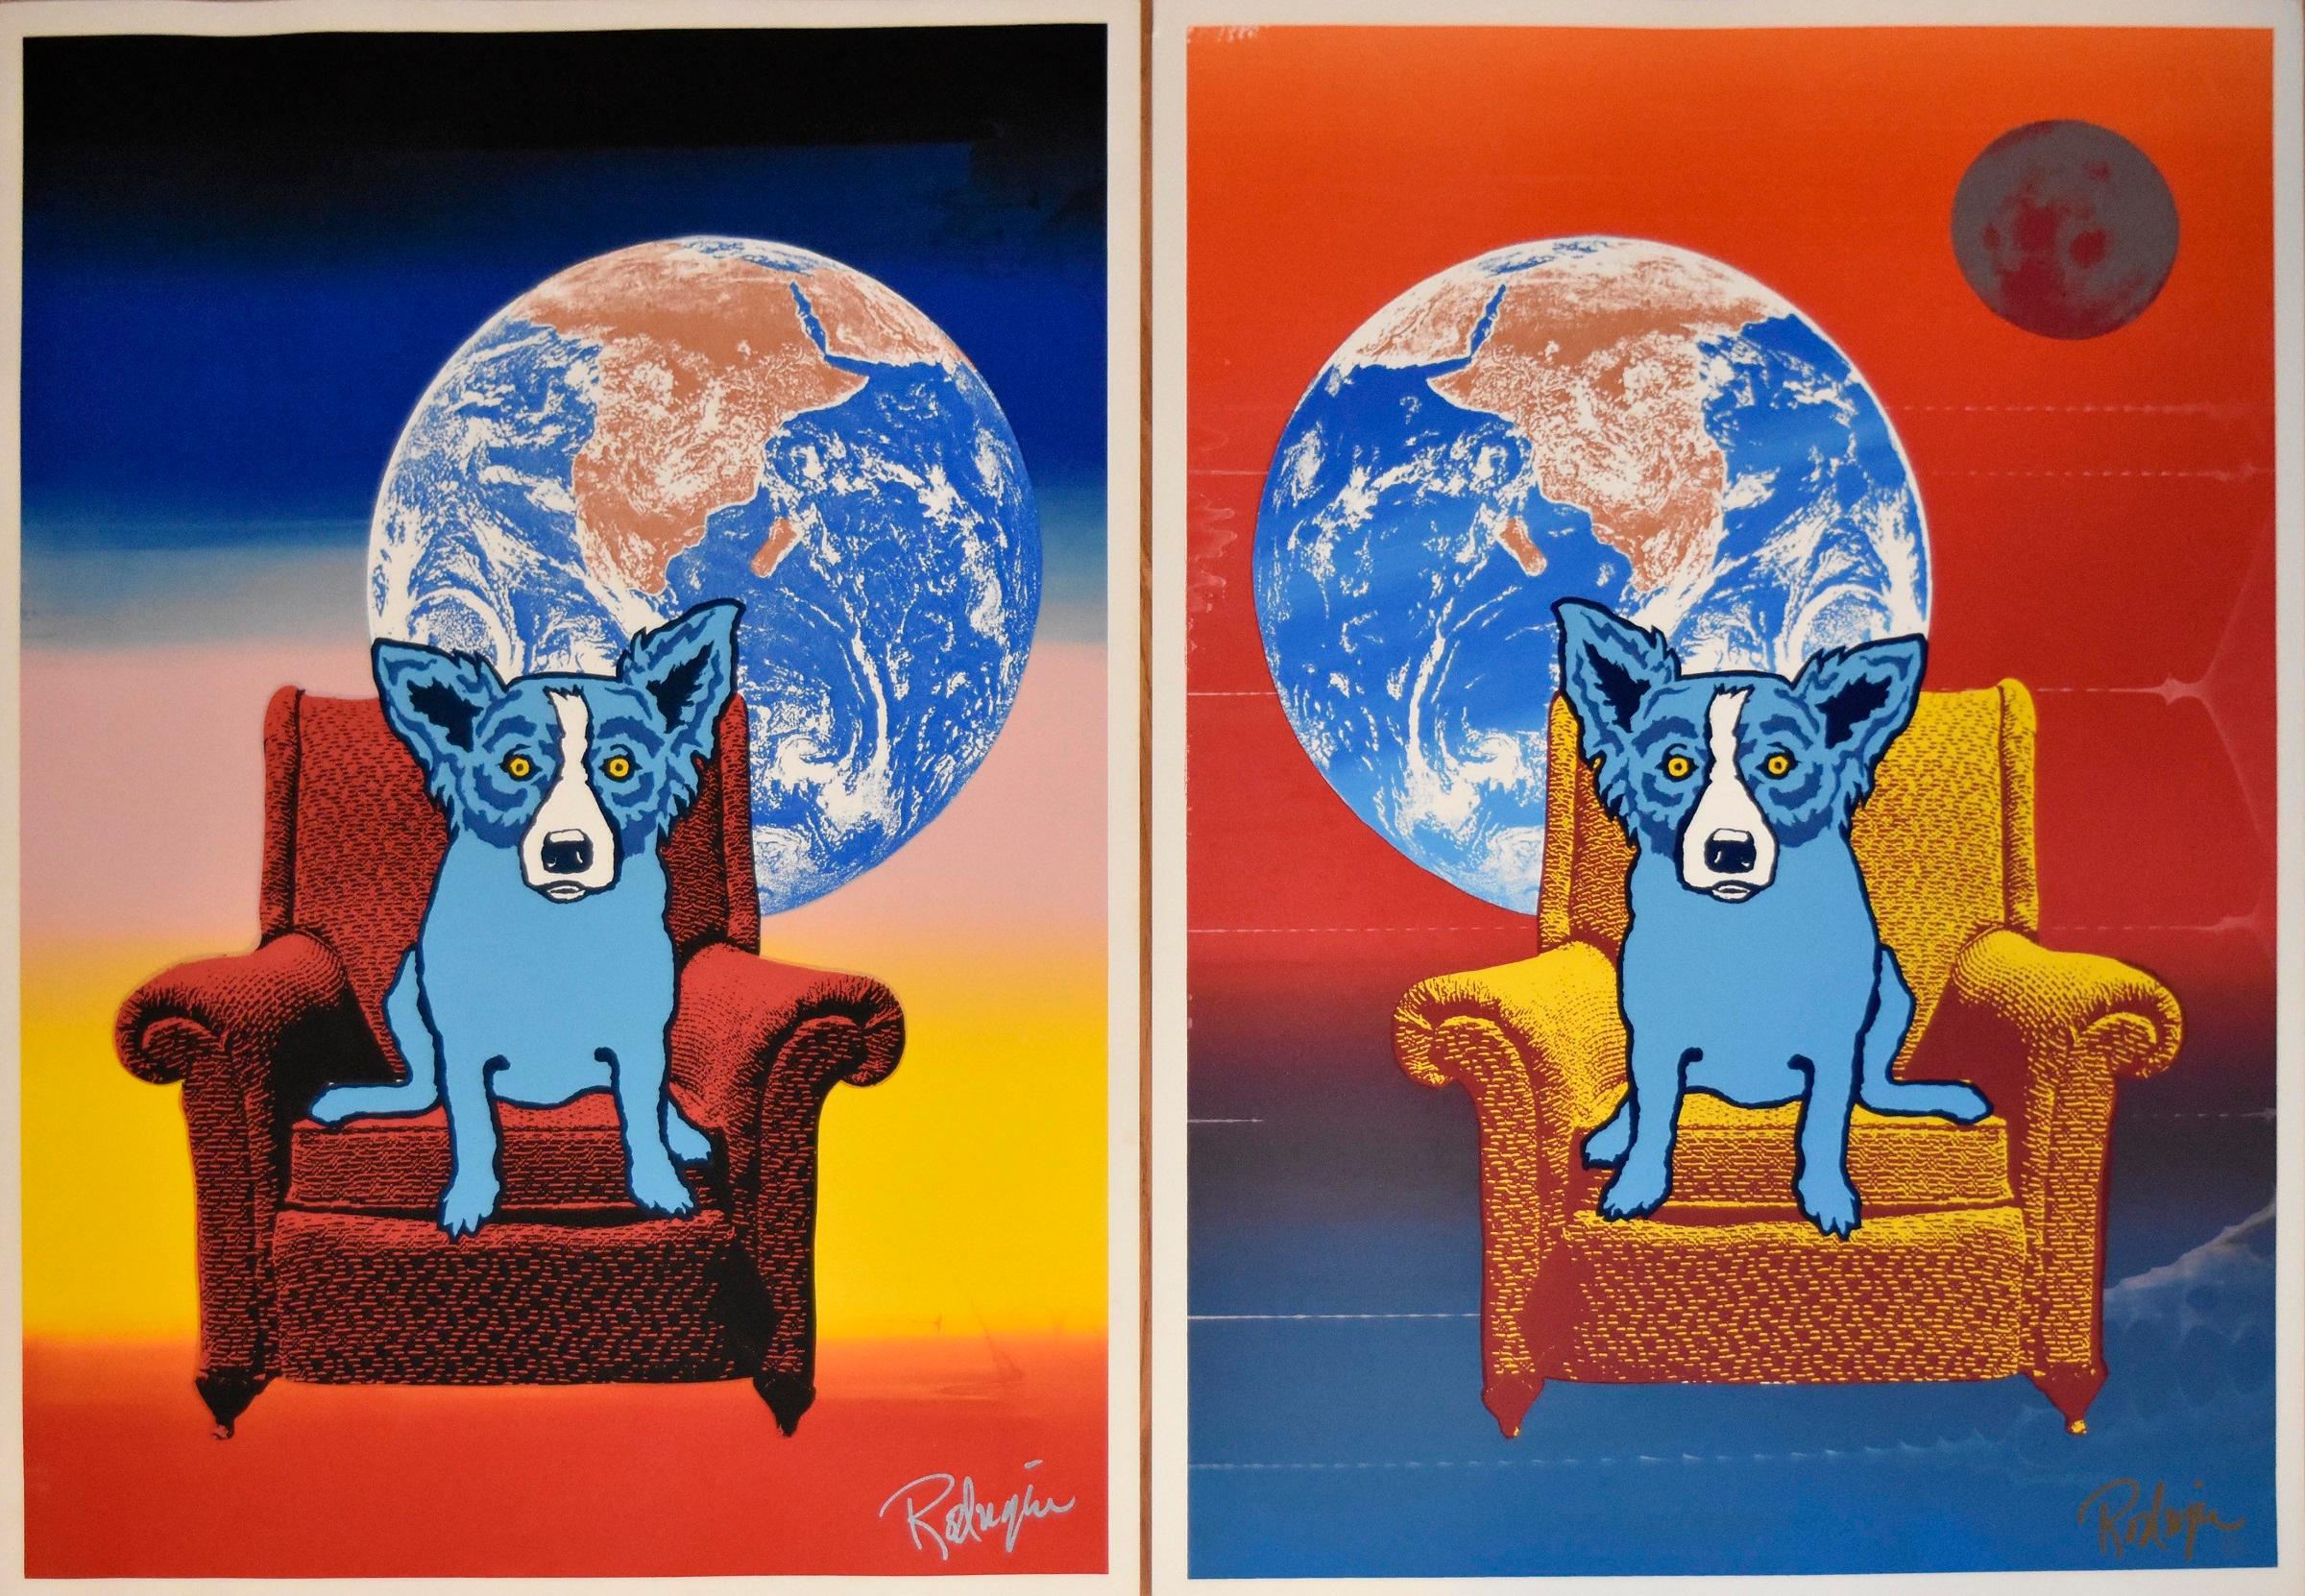 Space Chair - Strato Lounger Combination - Signed Silkscreen Print - Blue Dog